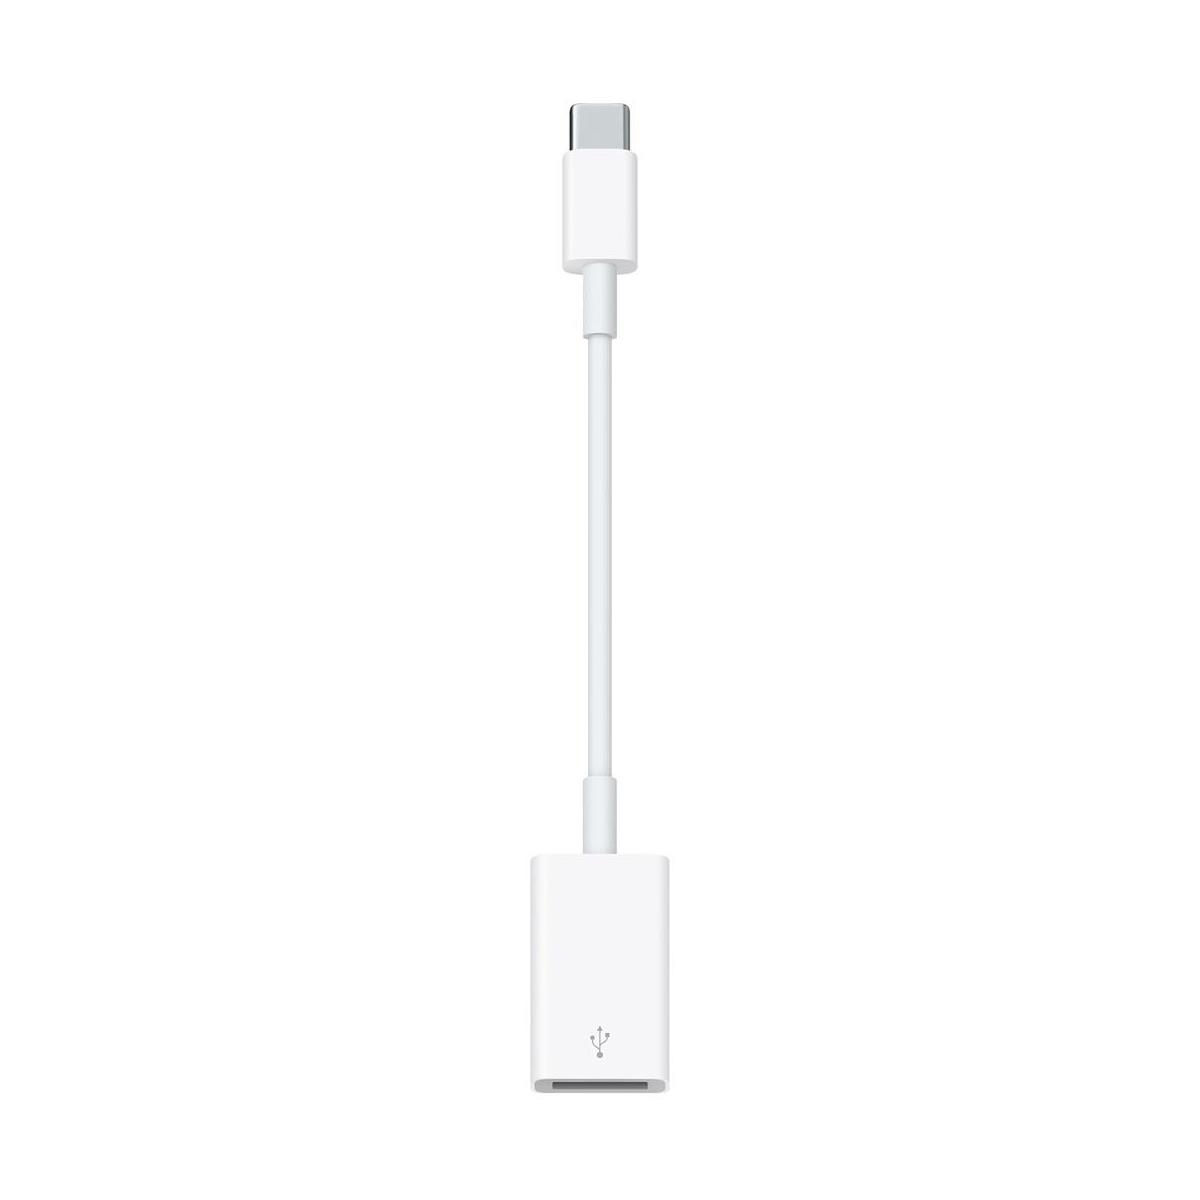 Image of Apple USB-C to USB Adapter for MacBook